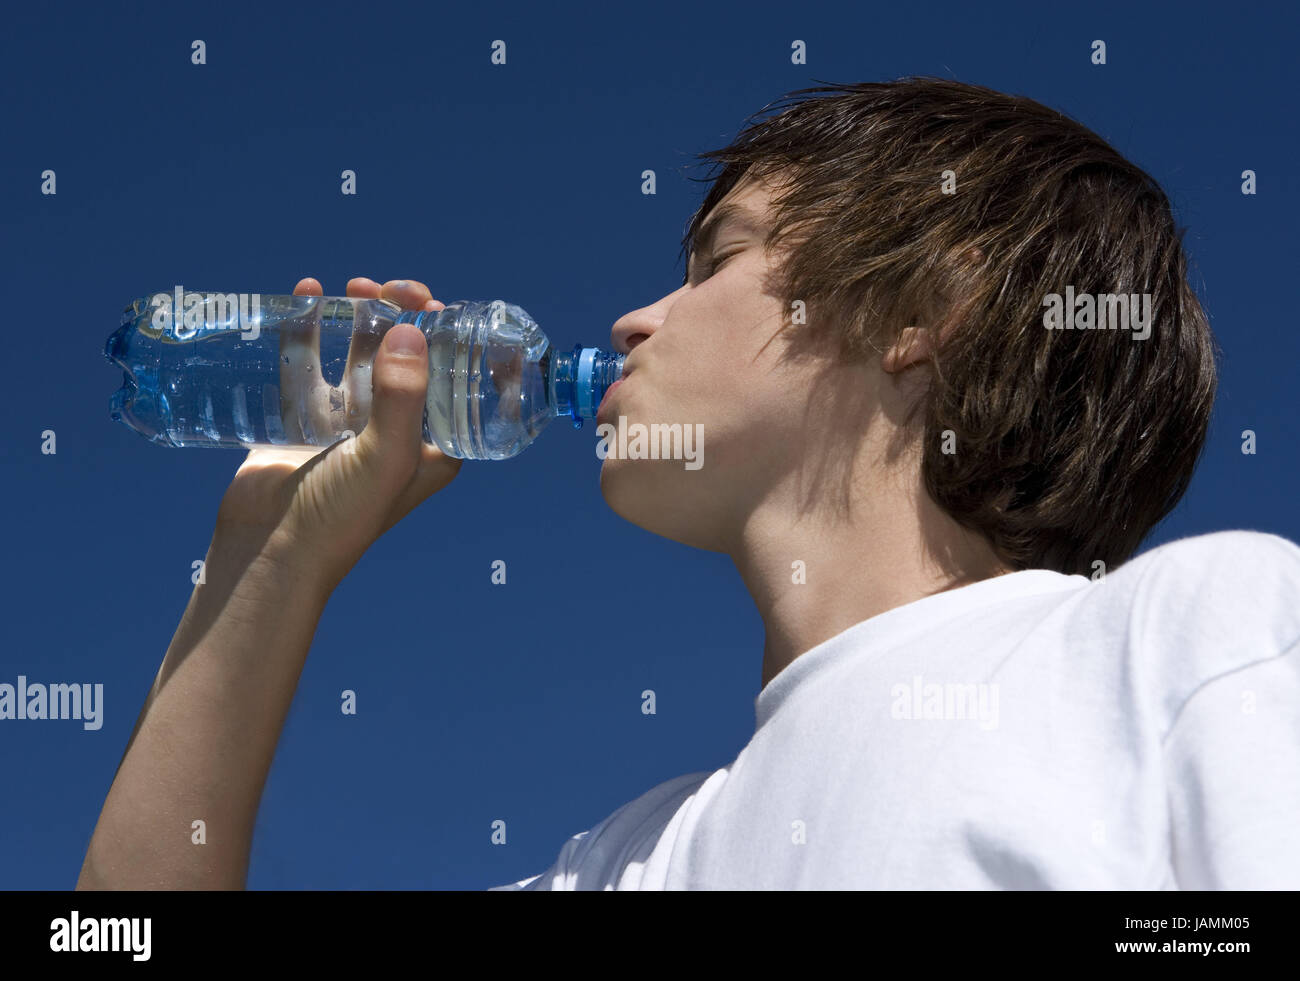 Teenagers,boy,water flask,thirst,drink,sky,blue,portrait,curled,people,T-shirt,flask,water,refreshment,cooling,season,summer,sunshine,tread,at the side, Stock Photo